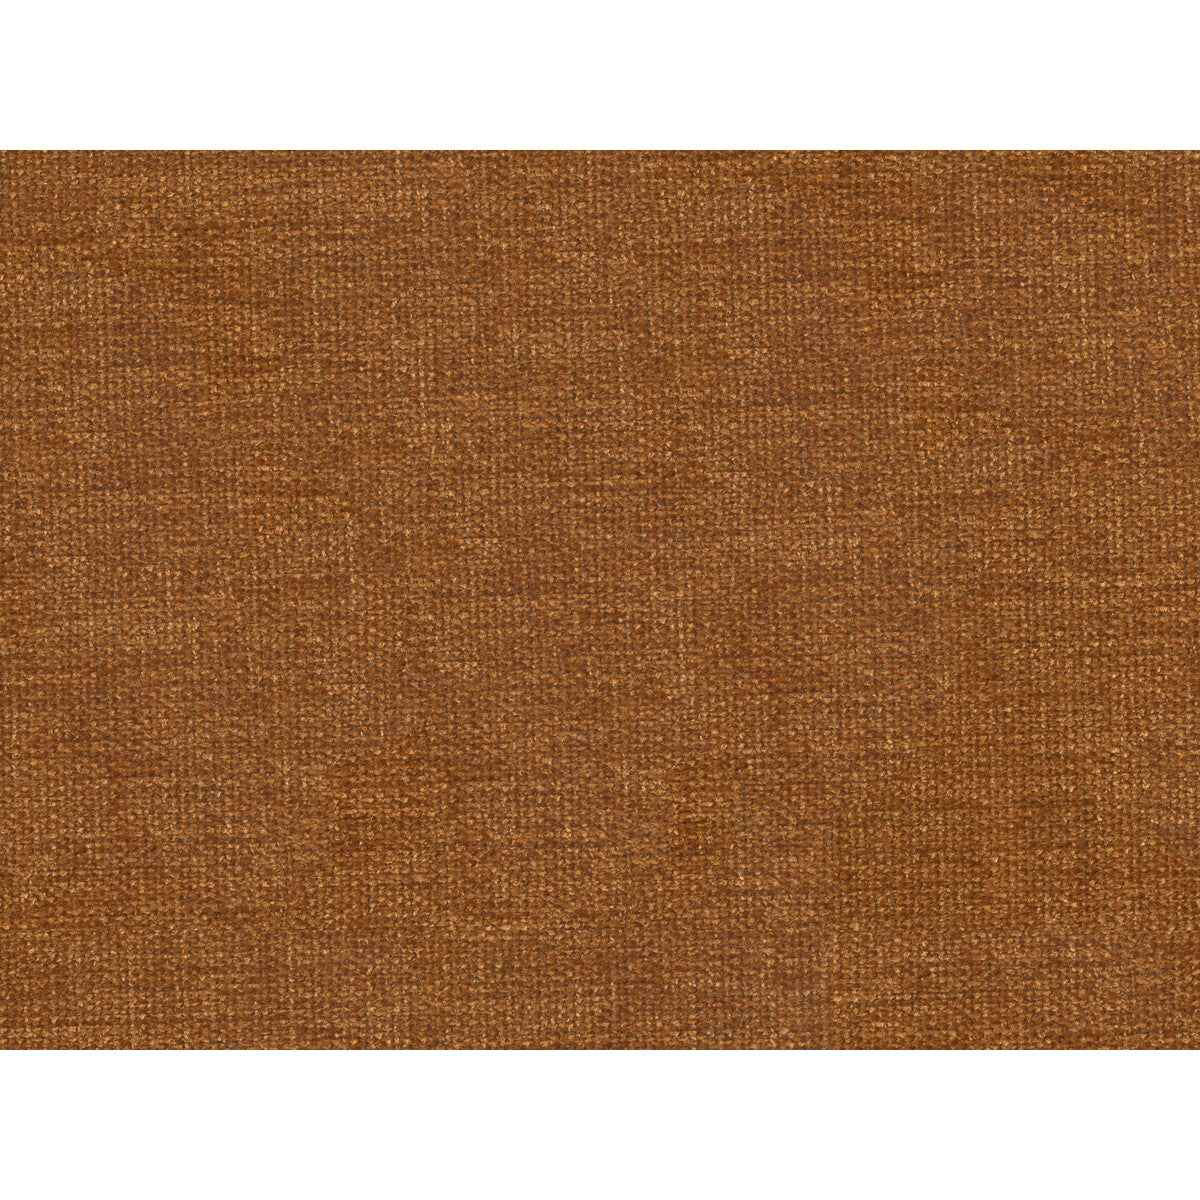 Kravet Contract fabric in 34961-124 color - pattern 34961.124.0 - by Kravet Contract in the Performance Kravetarmor collection